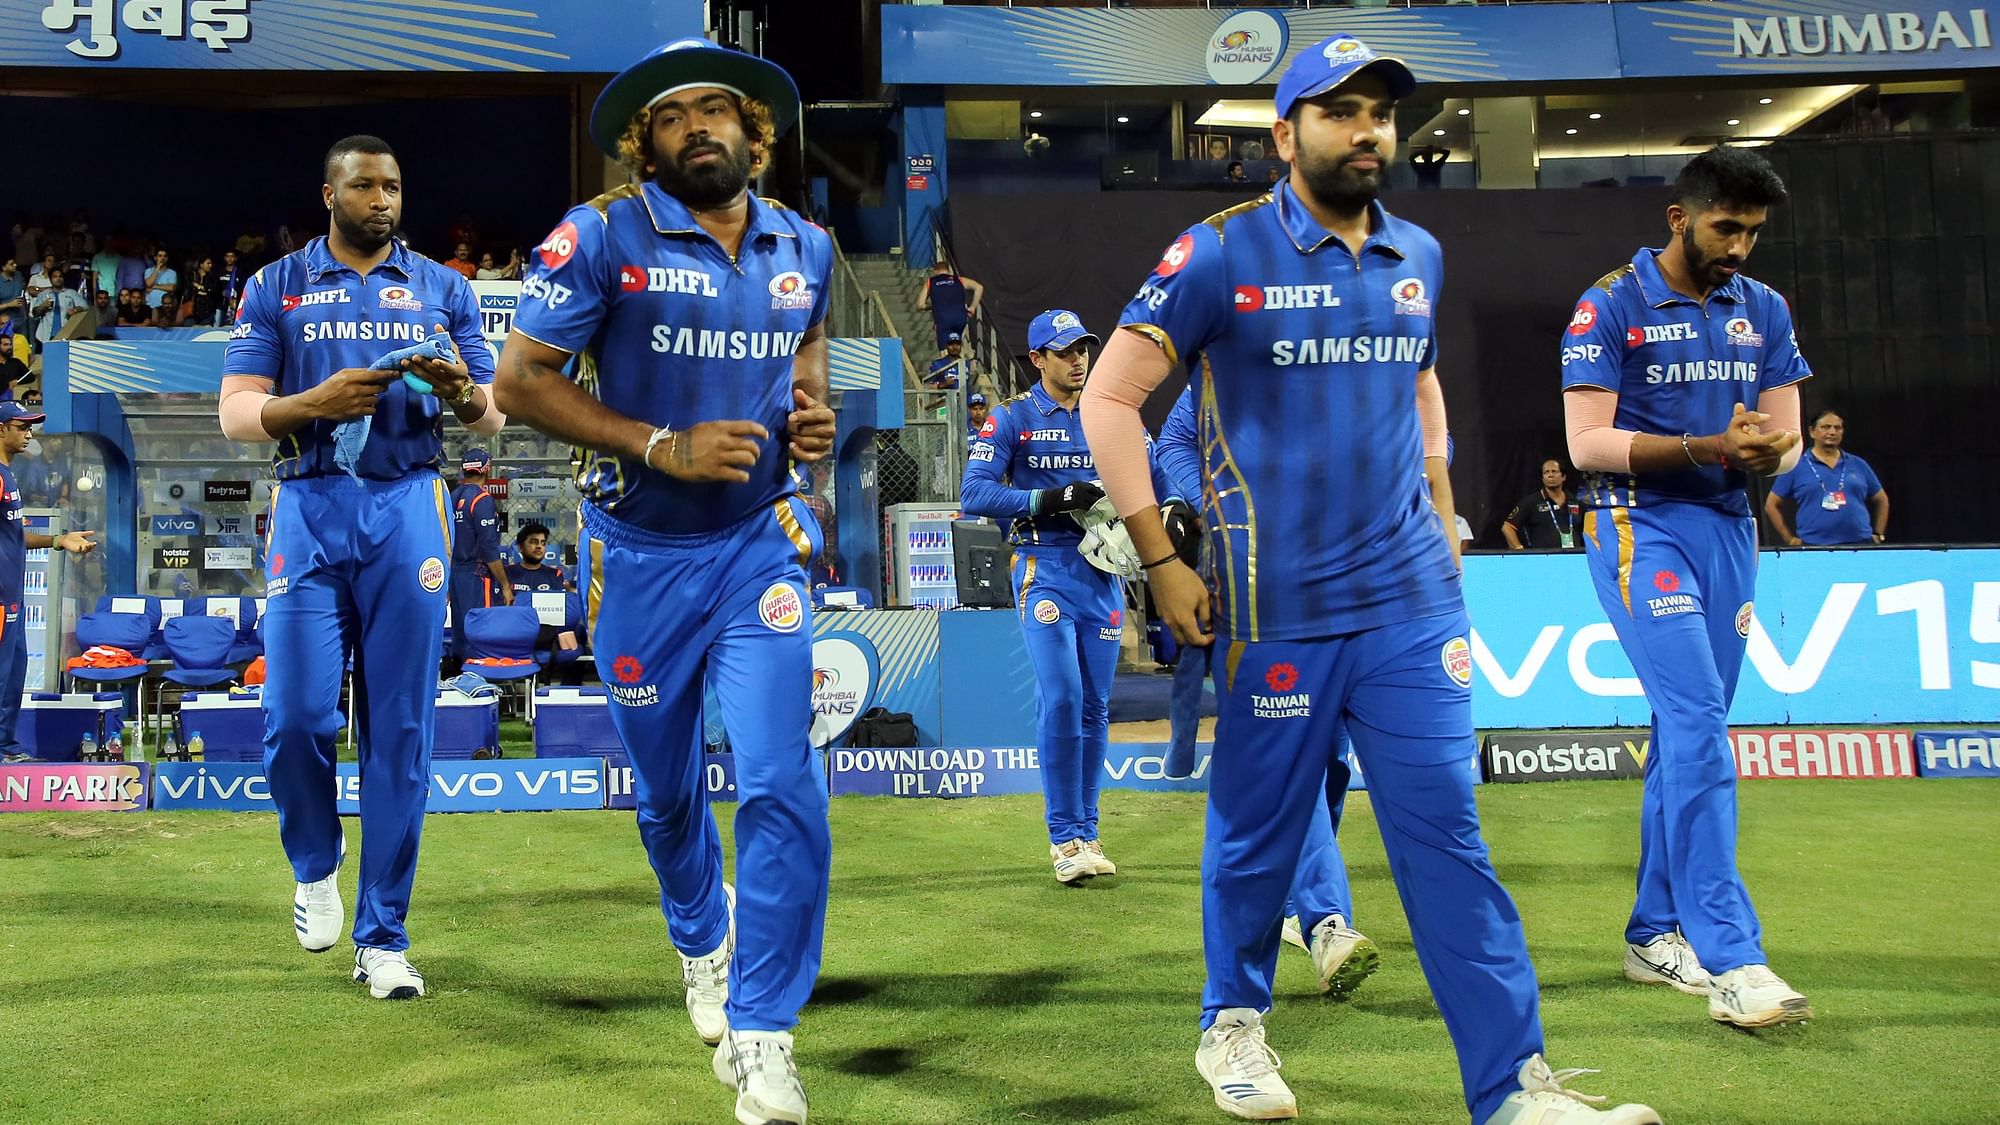 Mumbai Indians ended the league stage by topping the points table of IPL 2019.